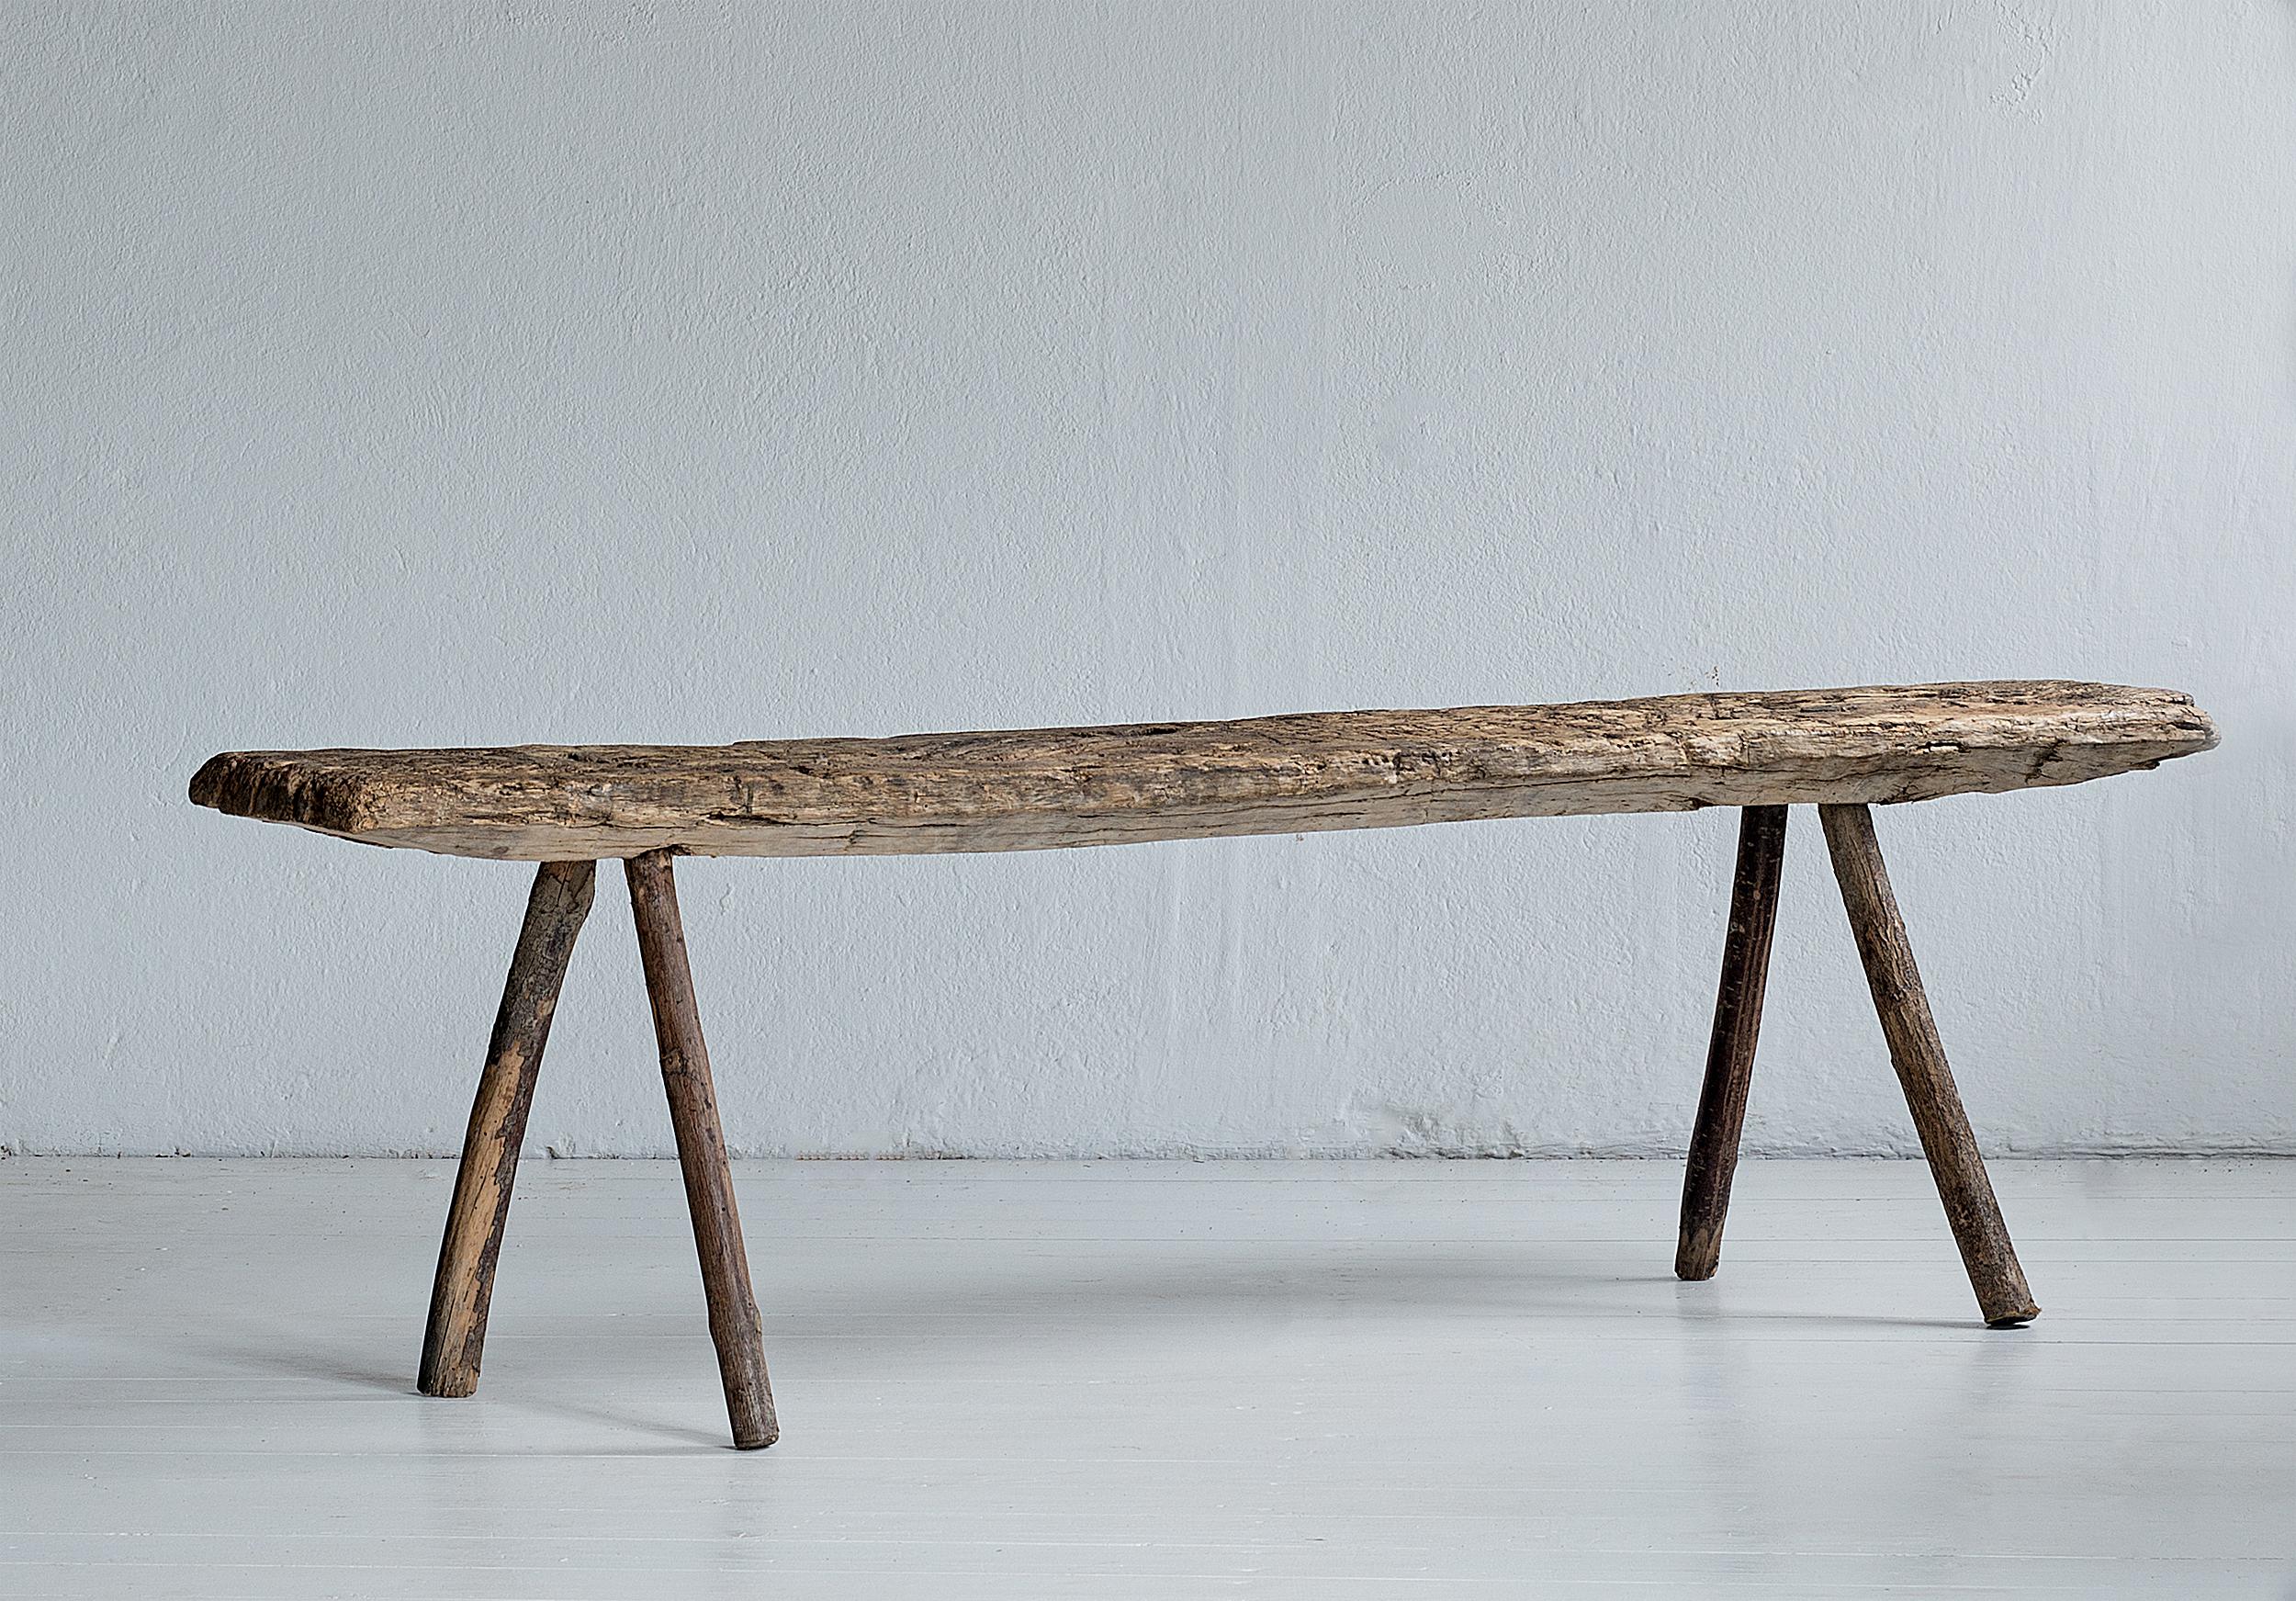 Wabi-Sabi, primitive wooden bench with great patina, Sweden, 19th century.